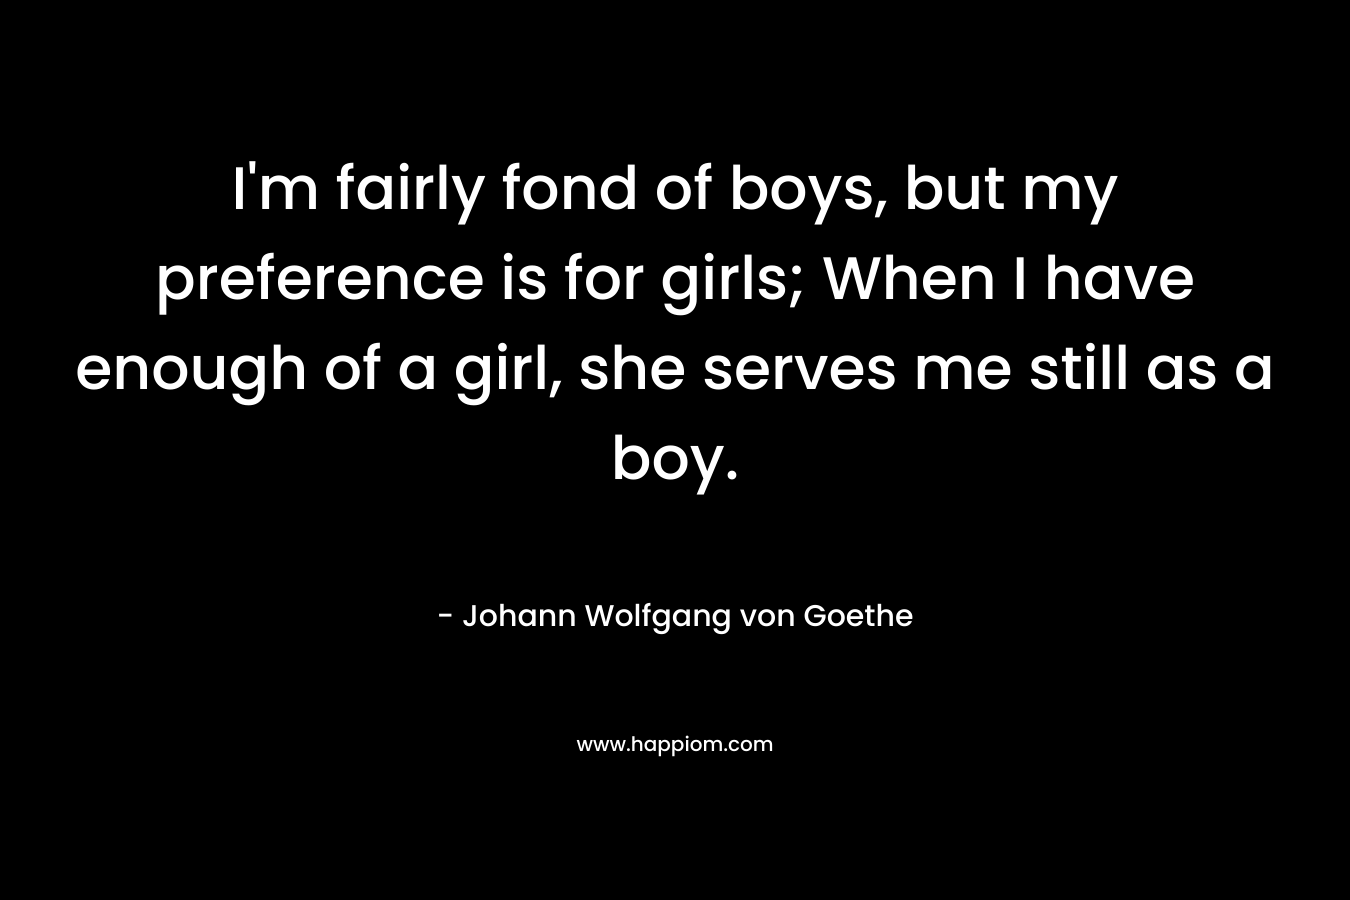 I’m fairly fond of boys, but my preference is for girls; When I have enough of a girl, she serves me still as a boy. – Johann Wolfgang von Goethe